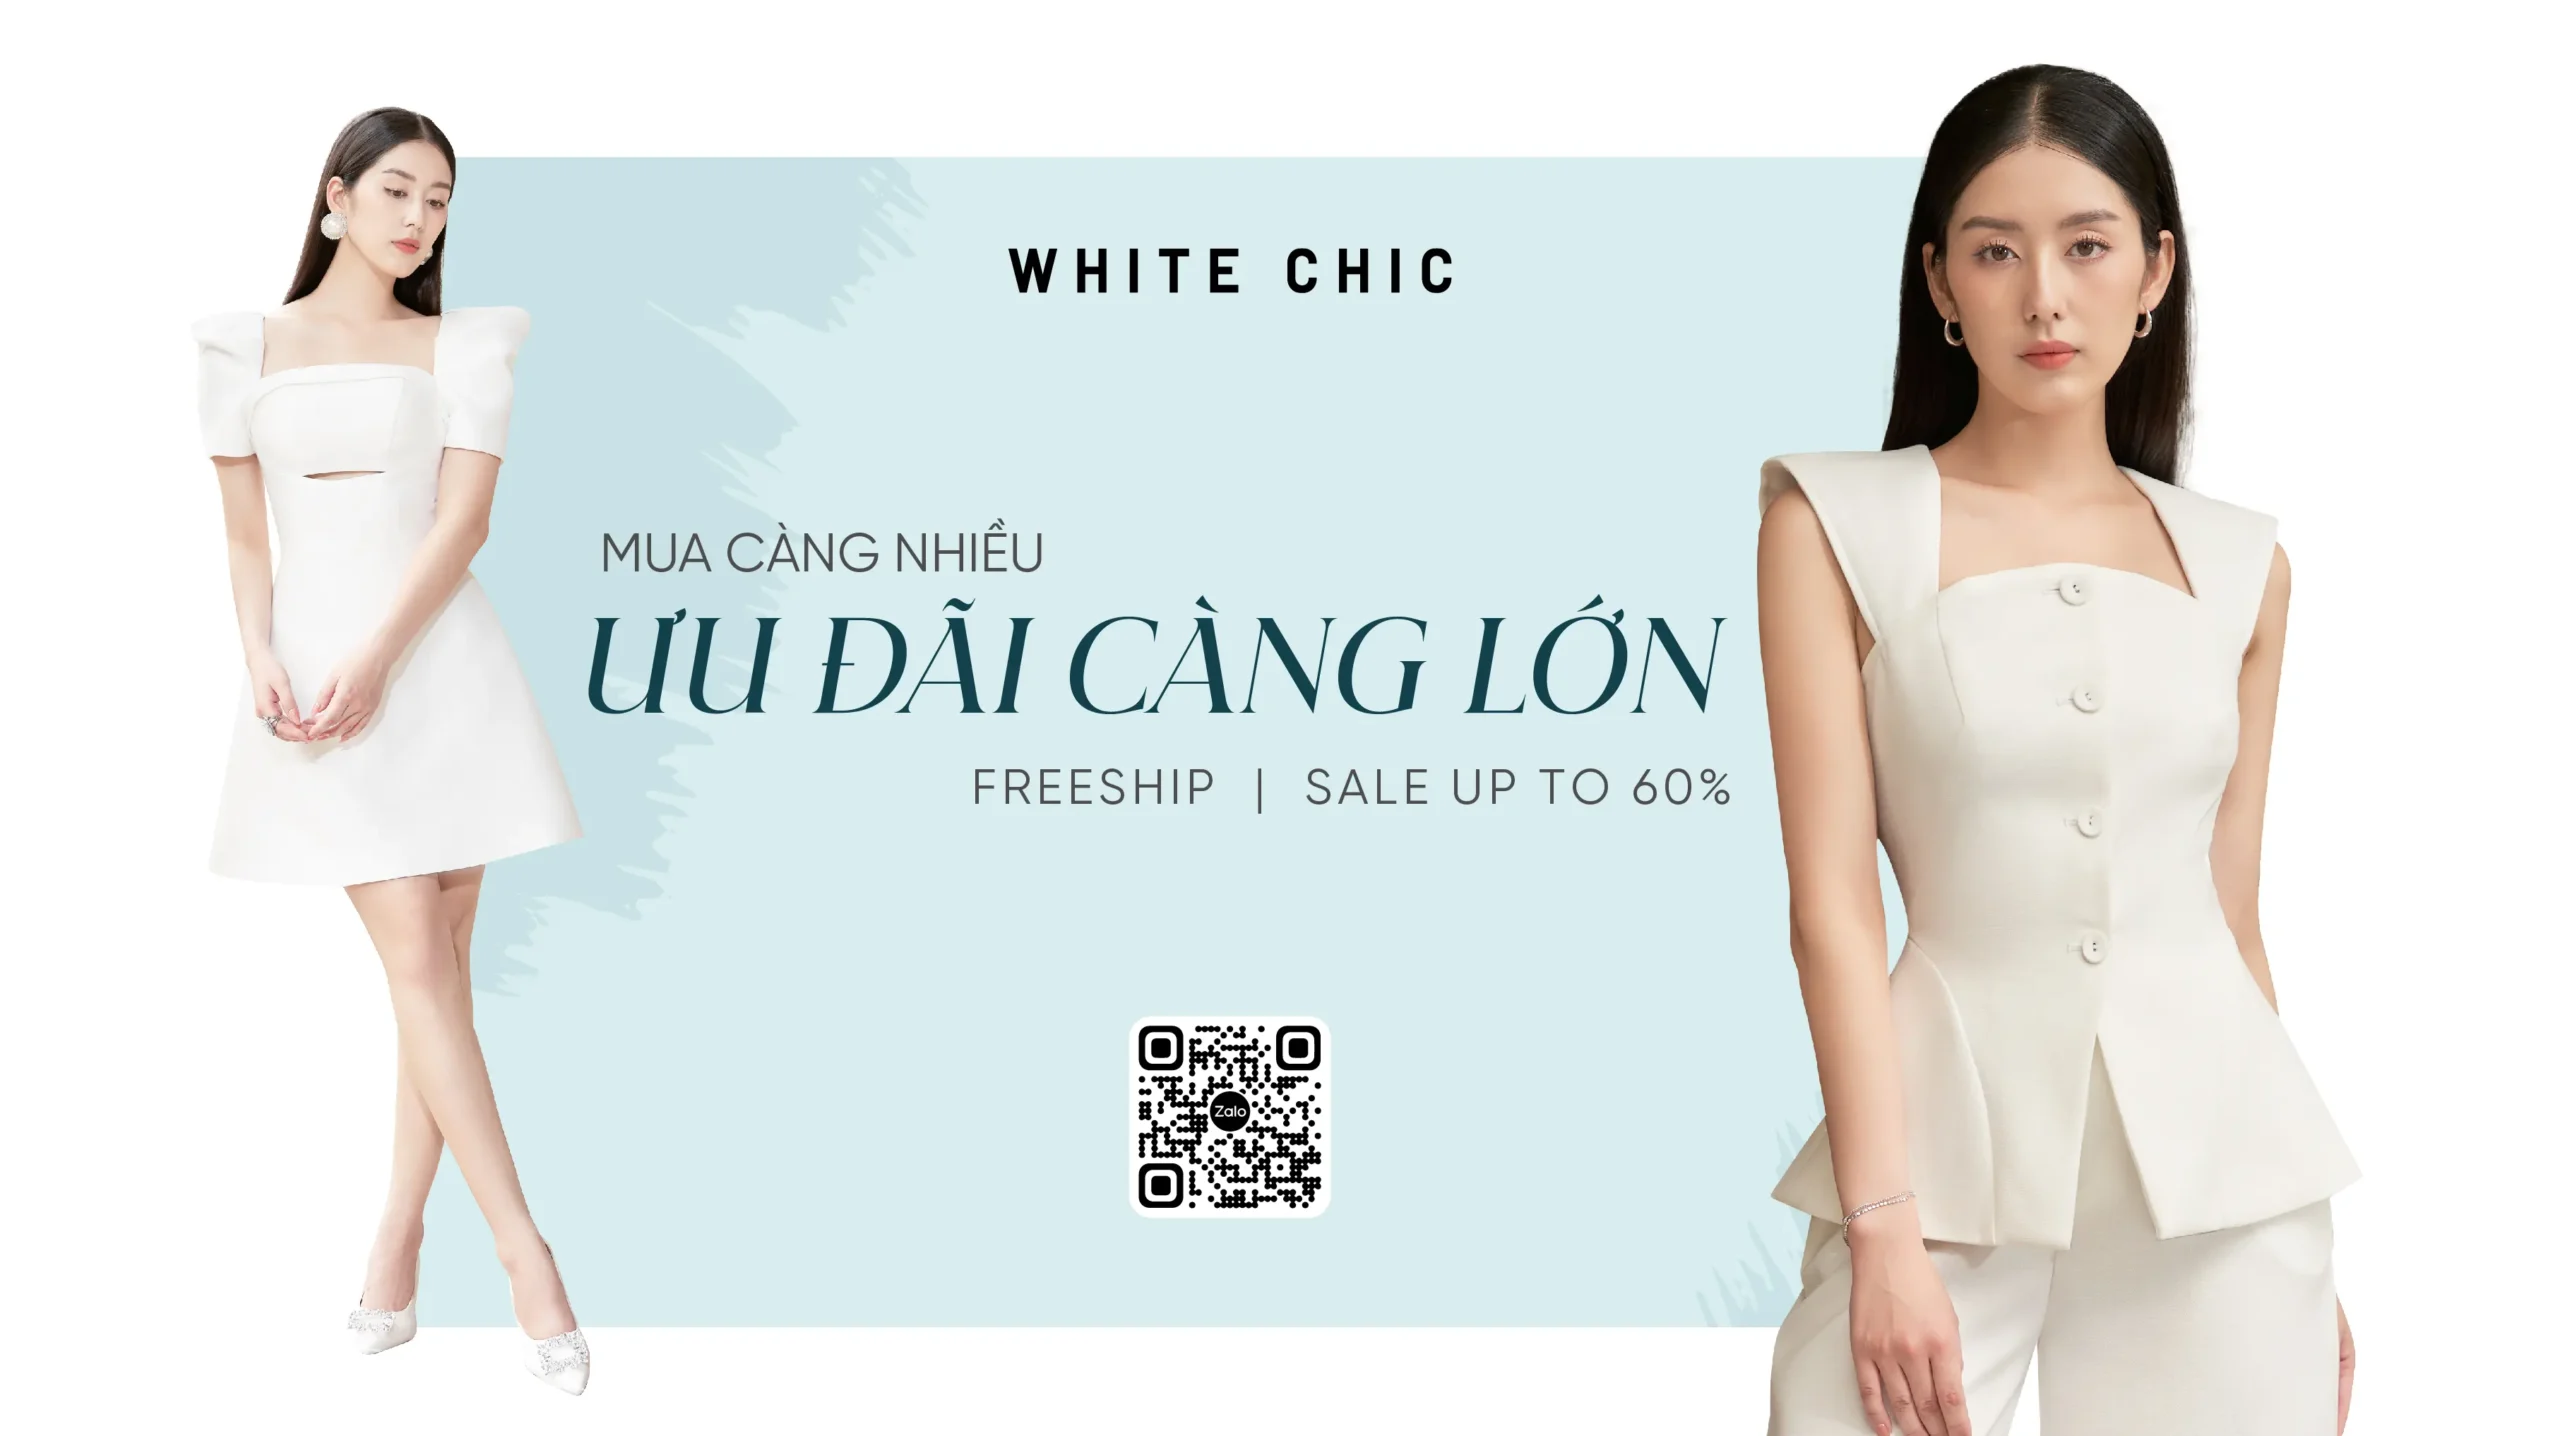 Whitechic Anh Rong Scaled